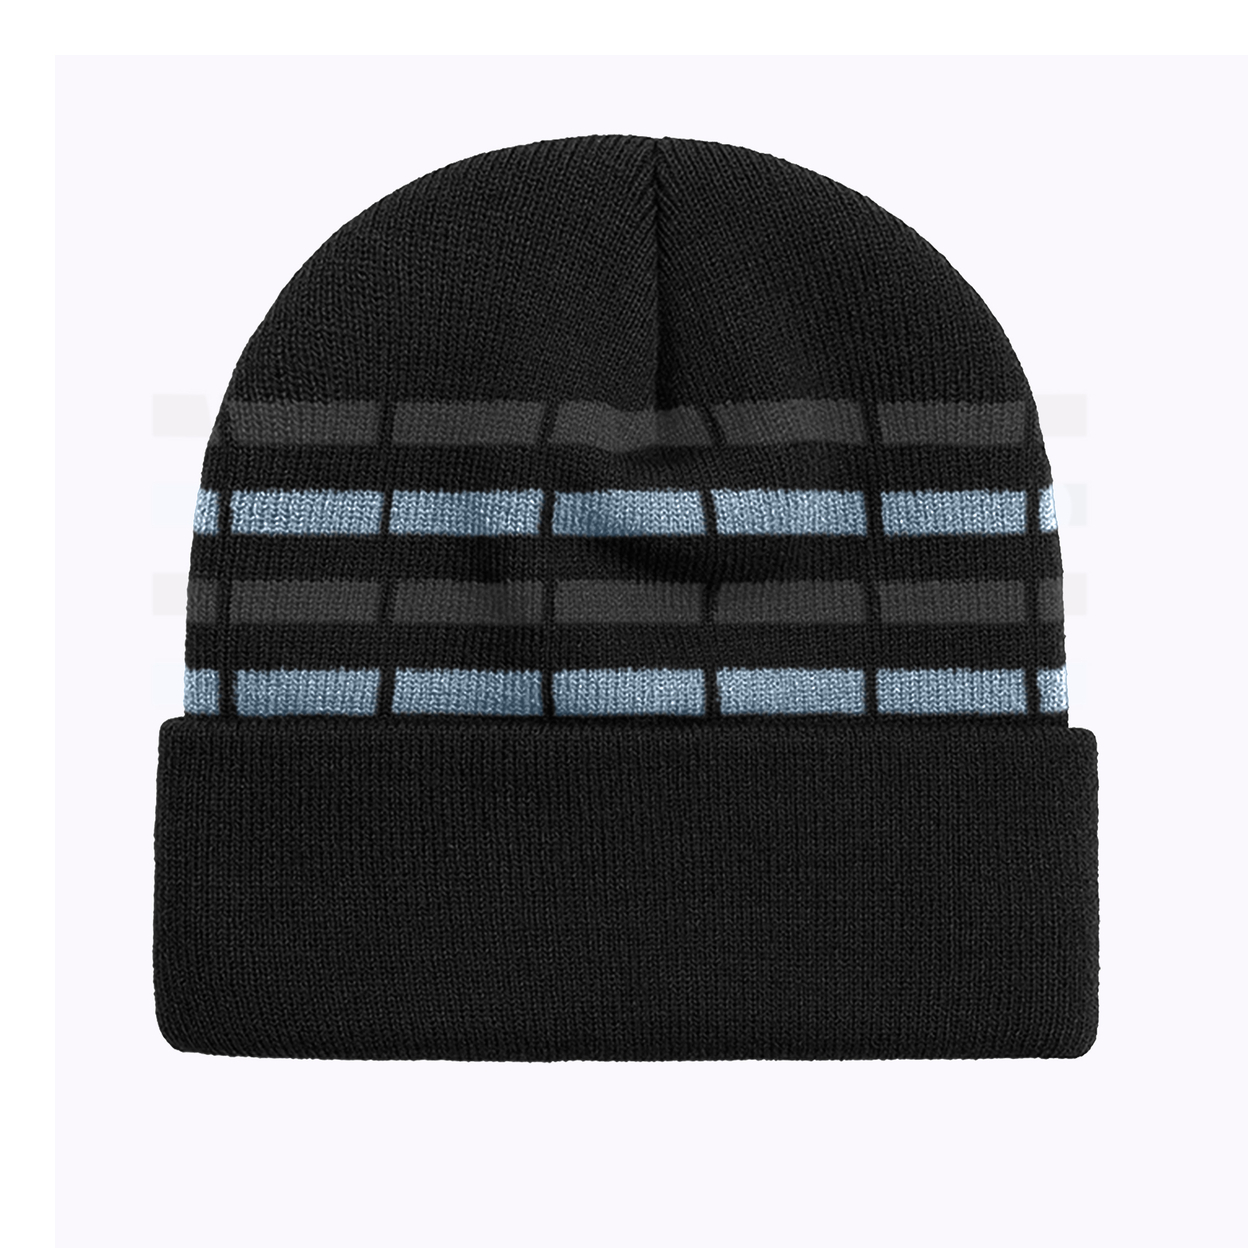 2-Pack Men's Winter Warm Cozy Knit Cuffed Solid & Striped Beanie Hat With Faux Fur Lining - Black Solid / Navy Striped